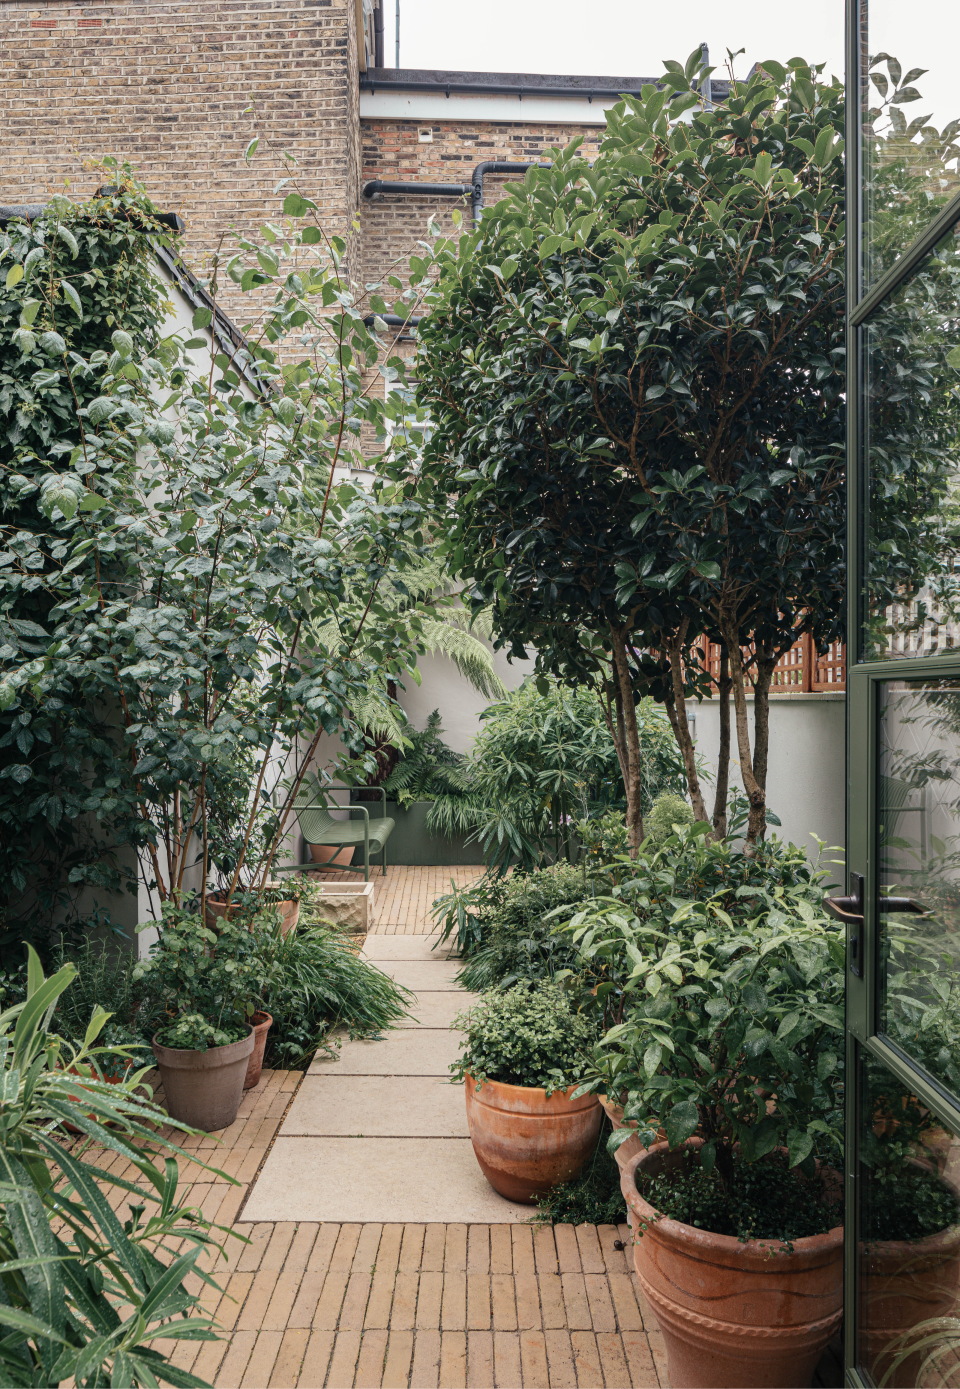 Incorporating large plants helps trick your mind and eye into believing a small garden is larger than it is (Handout)